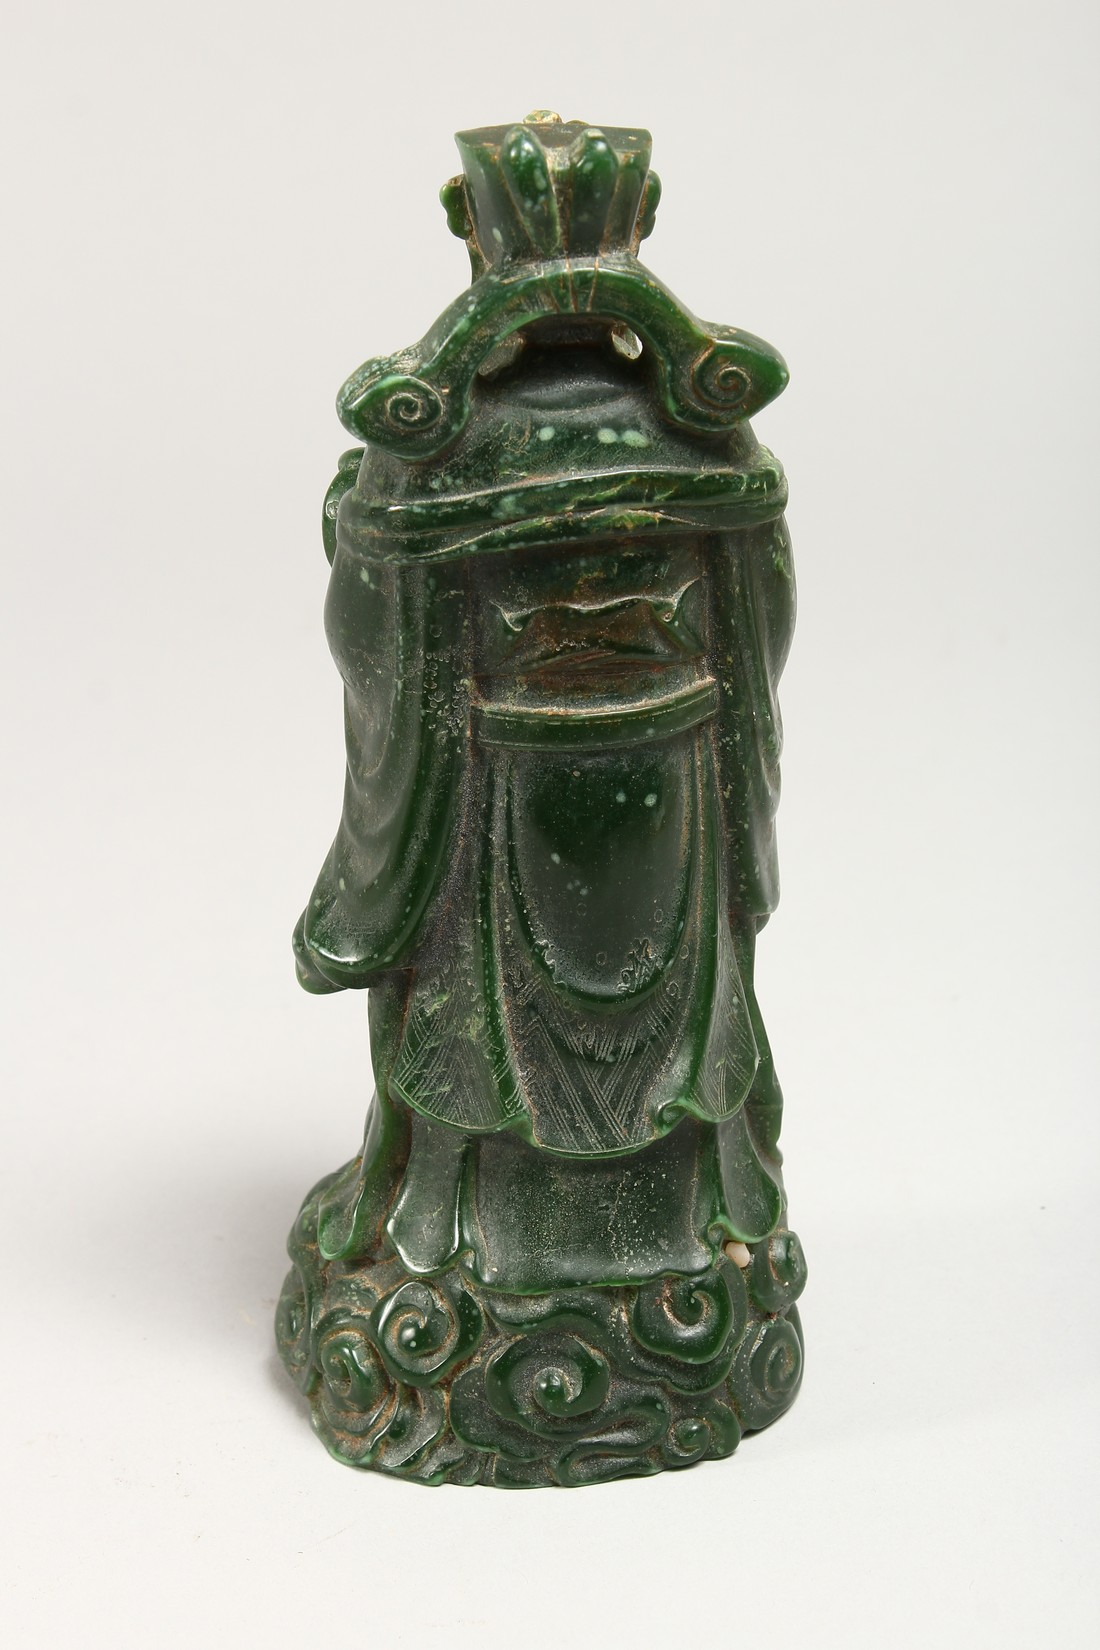 A CHINESE JADEITE STANDING FIGURE OF A SAGE 8ins high - Image 2 of 2